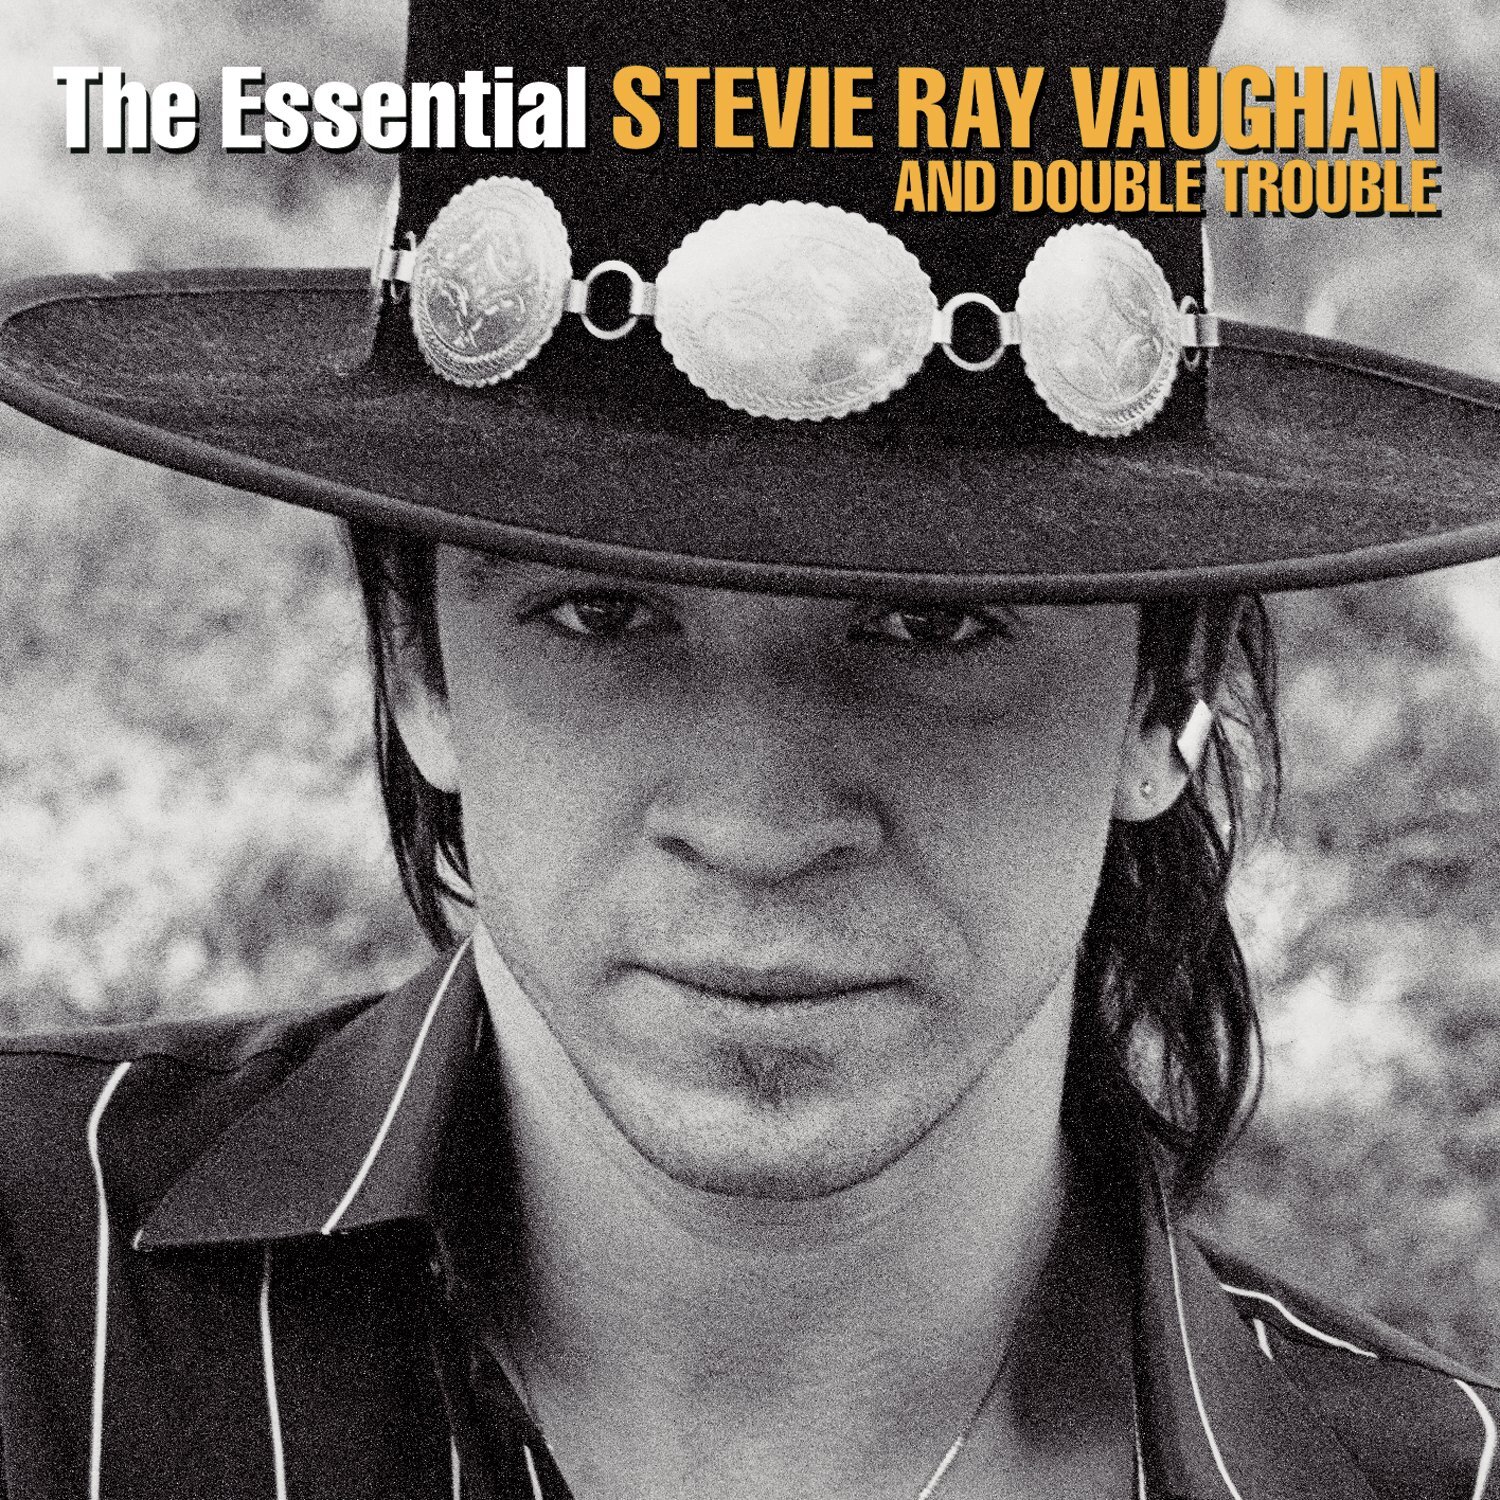 (32) The Essential Stevie Ray Vaughan and Double Trouble - Stevie Ray Vaughan and Double Trouble.jpg